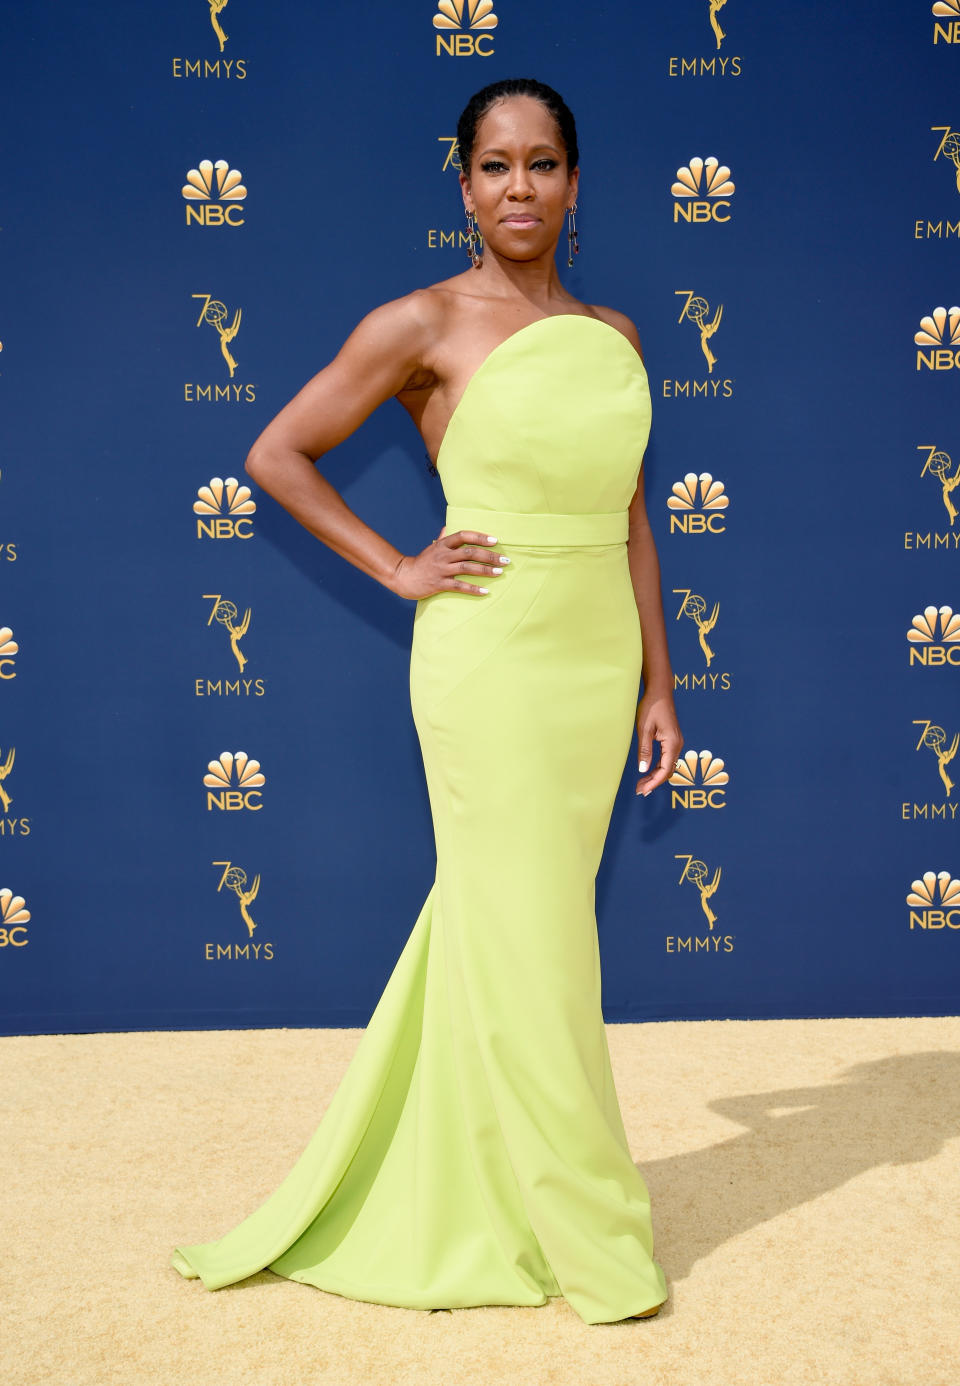 The actress in a structural Christian Siriano gown at the Emmys.